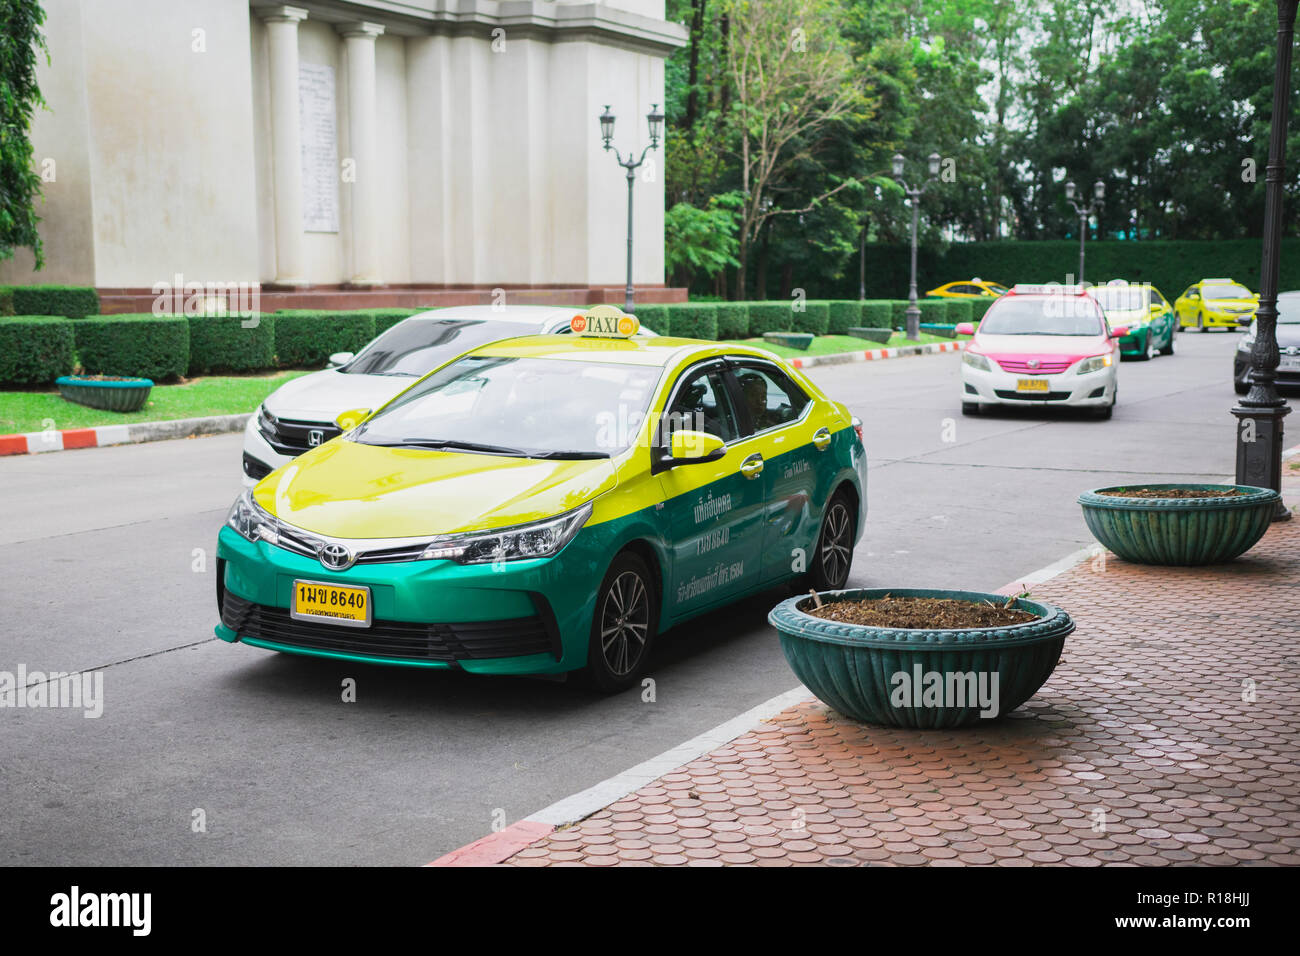 Samut Prakan, Thailand - November 9th, 2018: Thai Taxi driving on street in a private university Stock Photo